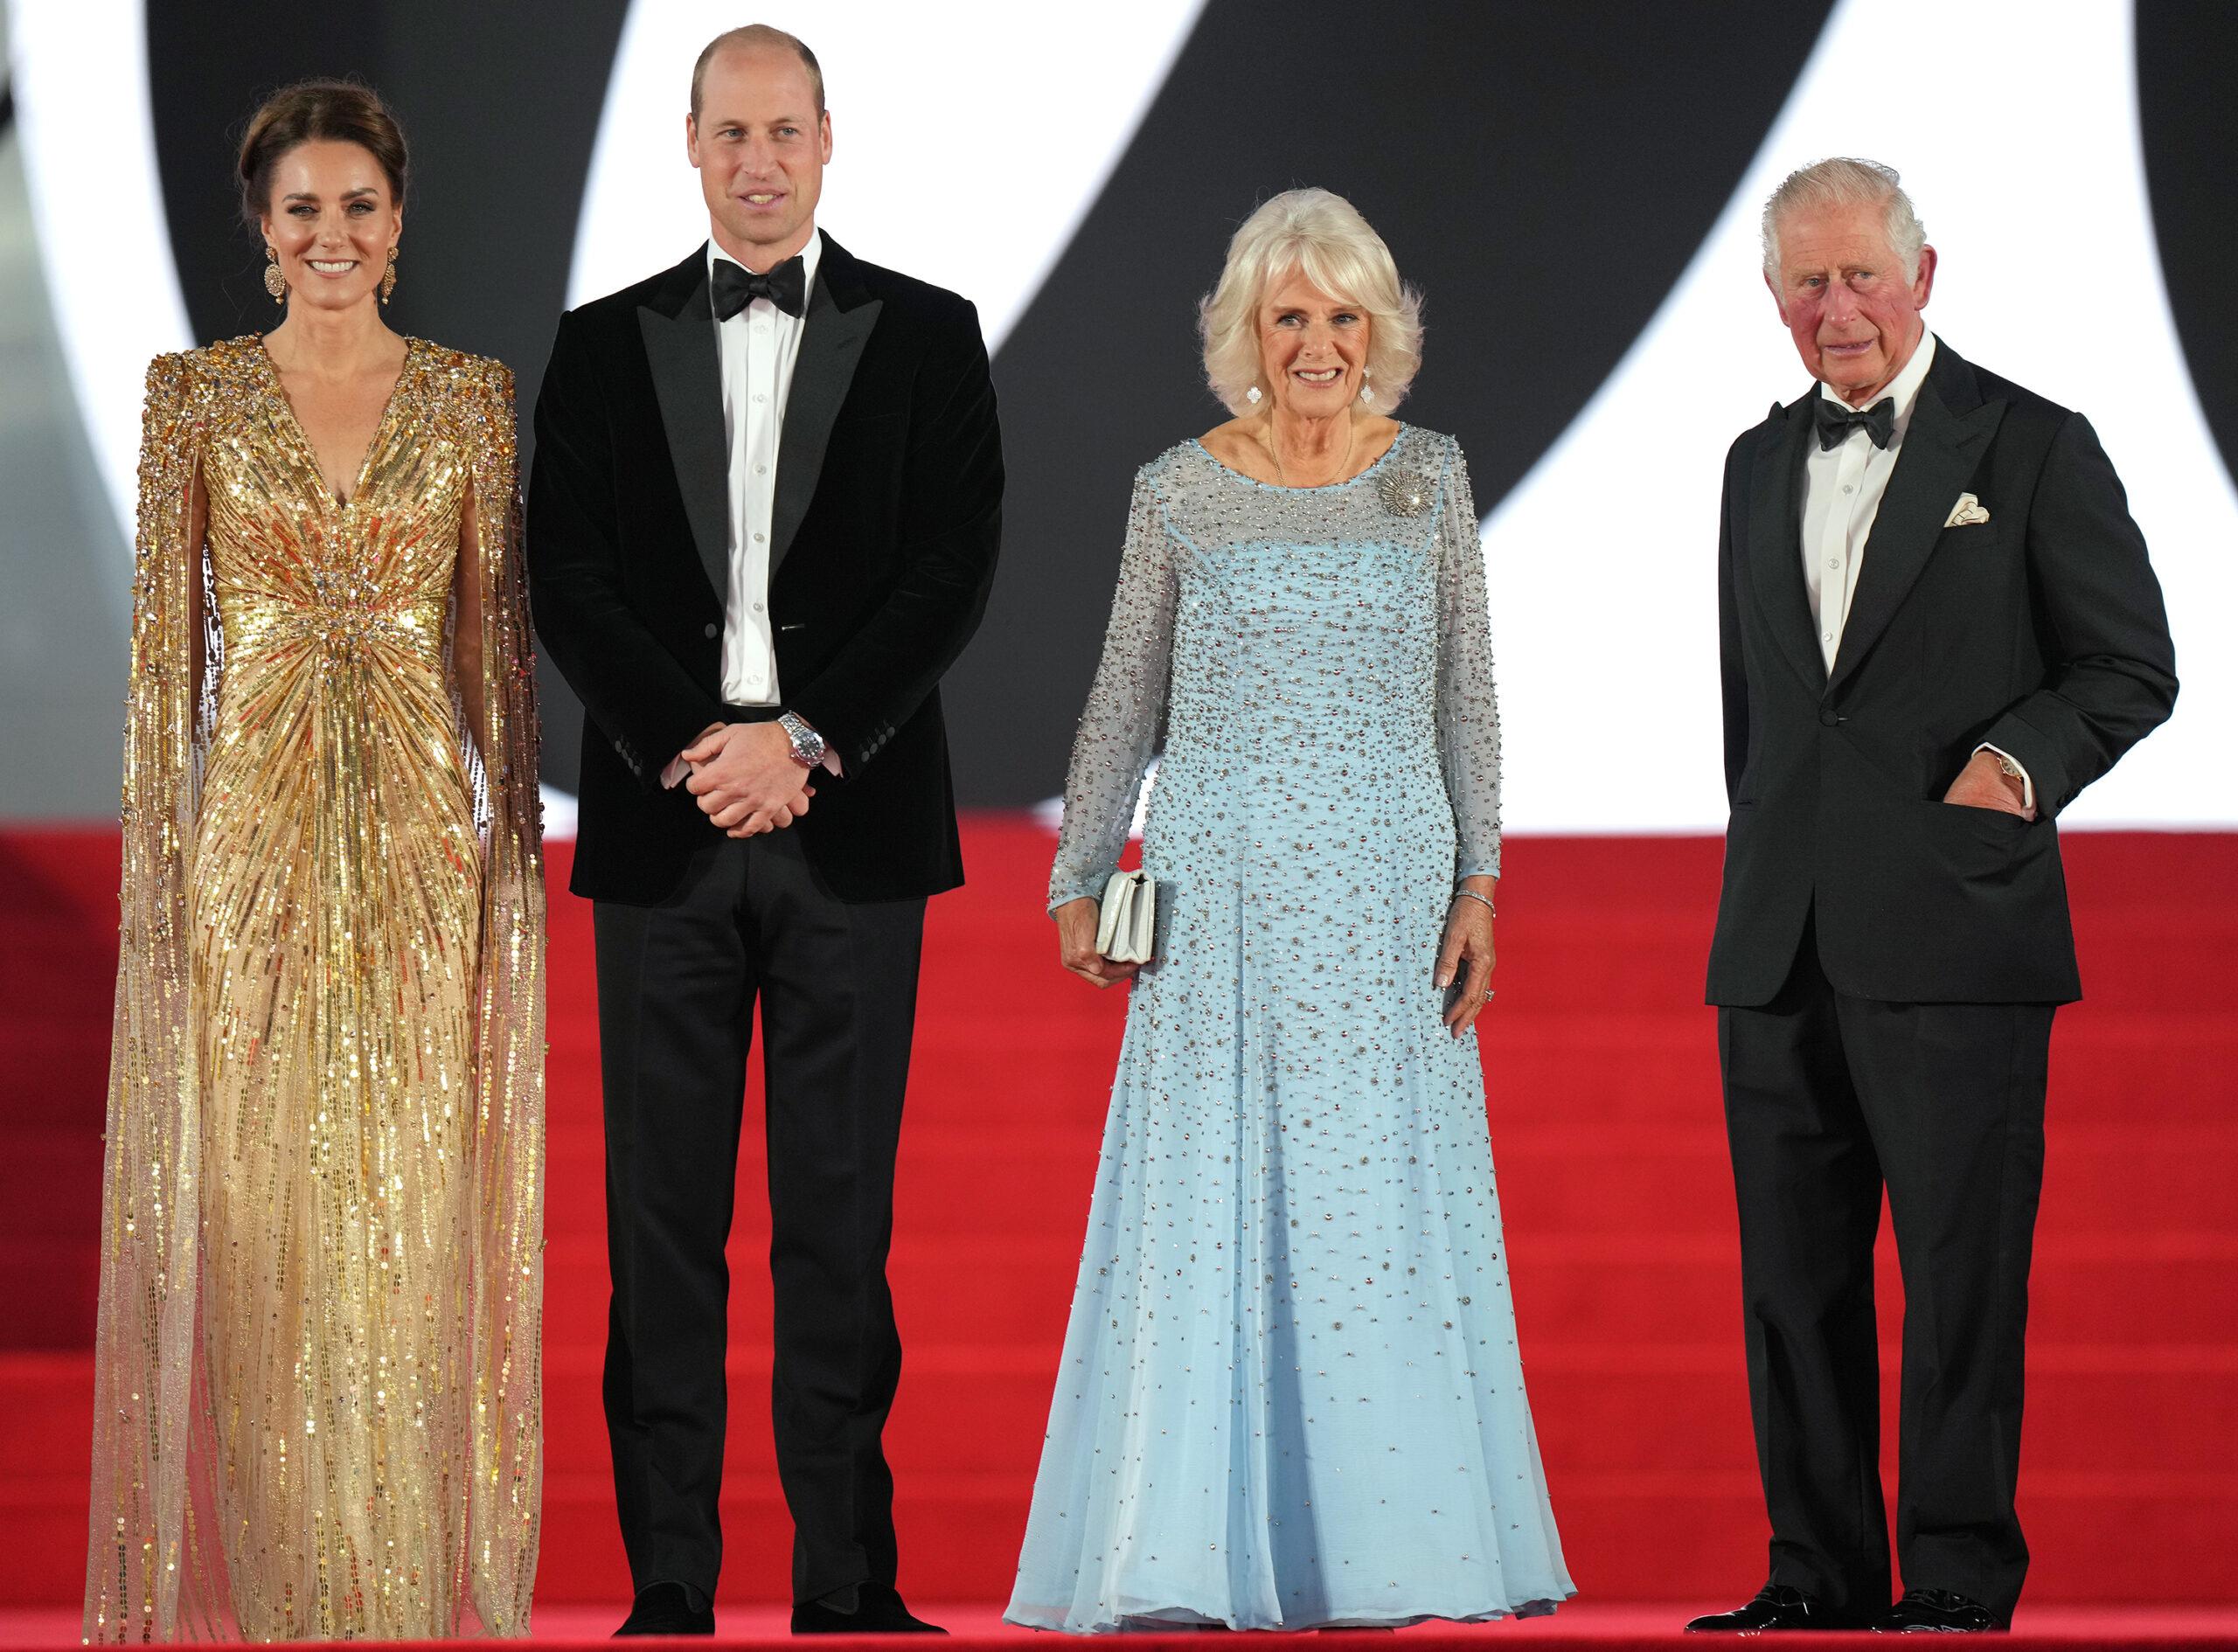 The World Premiere of 'No Time to Die' at the Royal Albert Hall, London, UK, on the 28th September 2021. 28 Sep 2021 Pictured: Catherine, Duchess of Cambridge, Kate Middleton, Prince William, Duke of Cambridge, Camilla, Duchess of Cornwall, Prince Charles, Prince of Wales. 